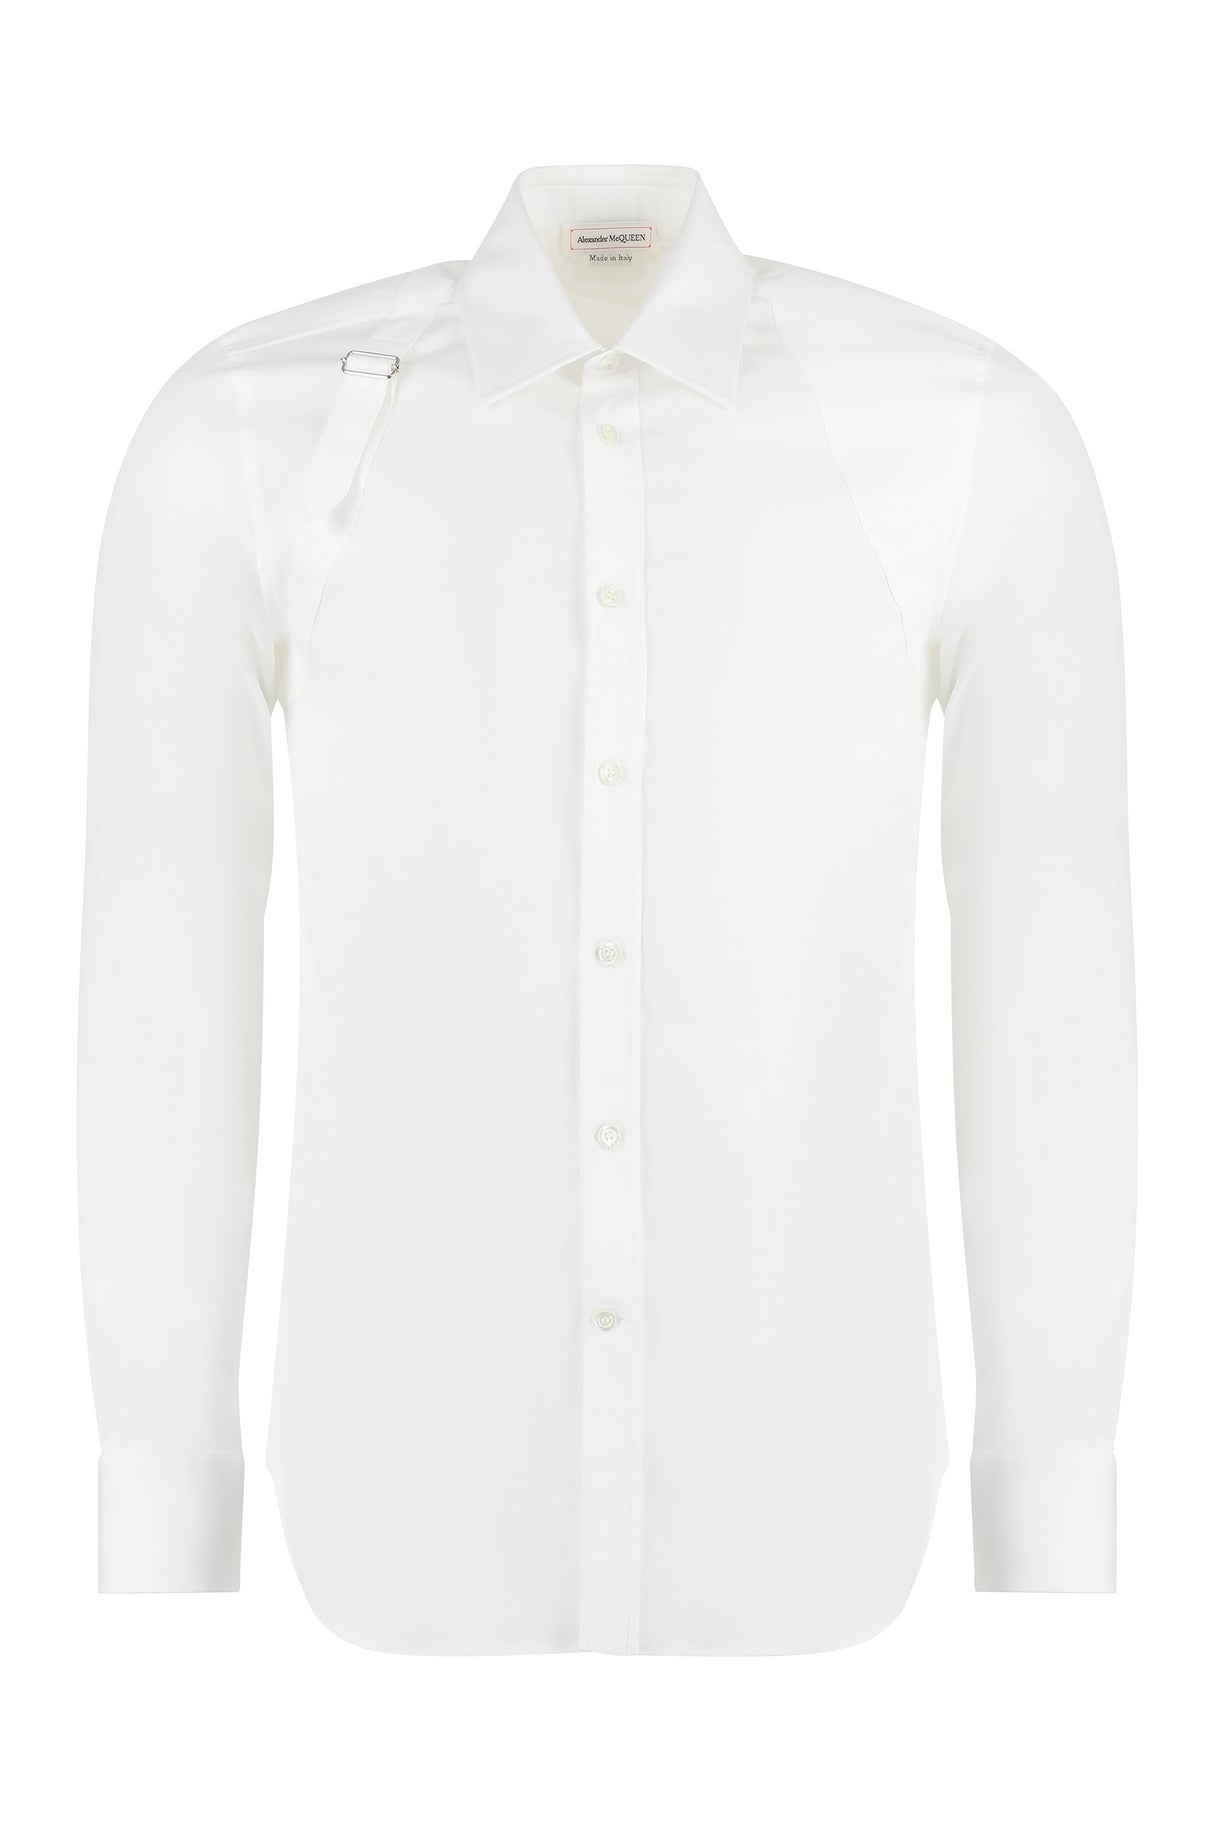 White Harness Shirt - Slim-Fit Stretch Cotton by ALEXANDER MCQUEEN for Men